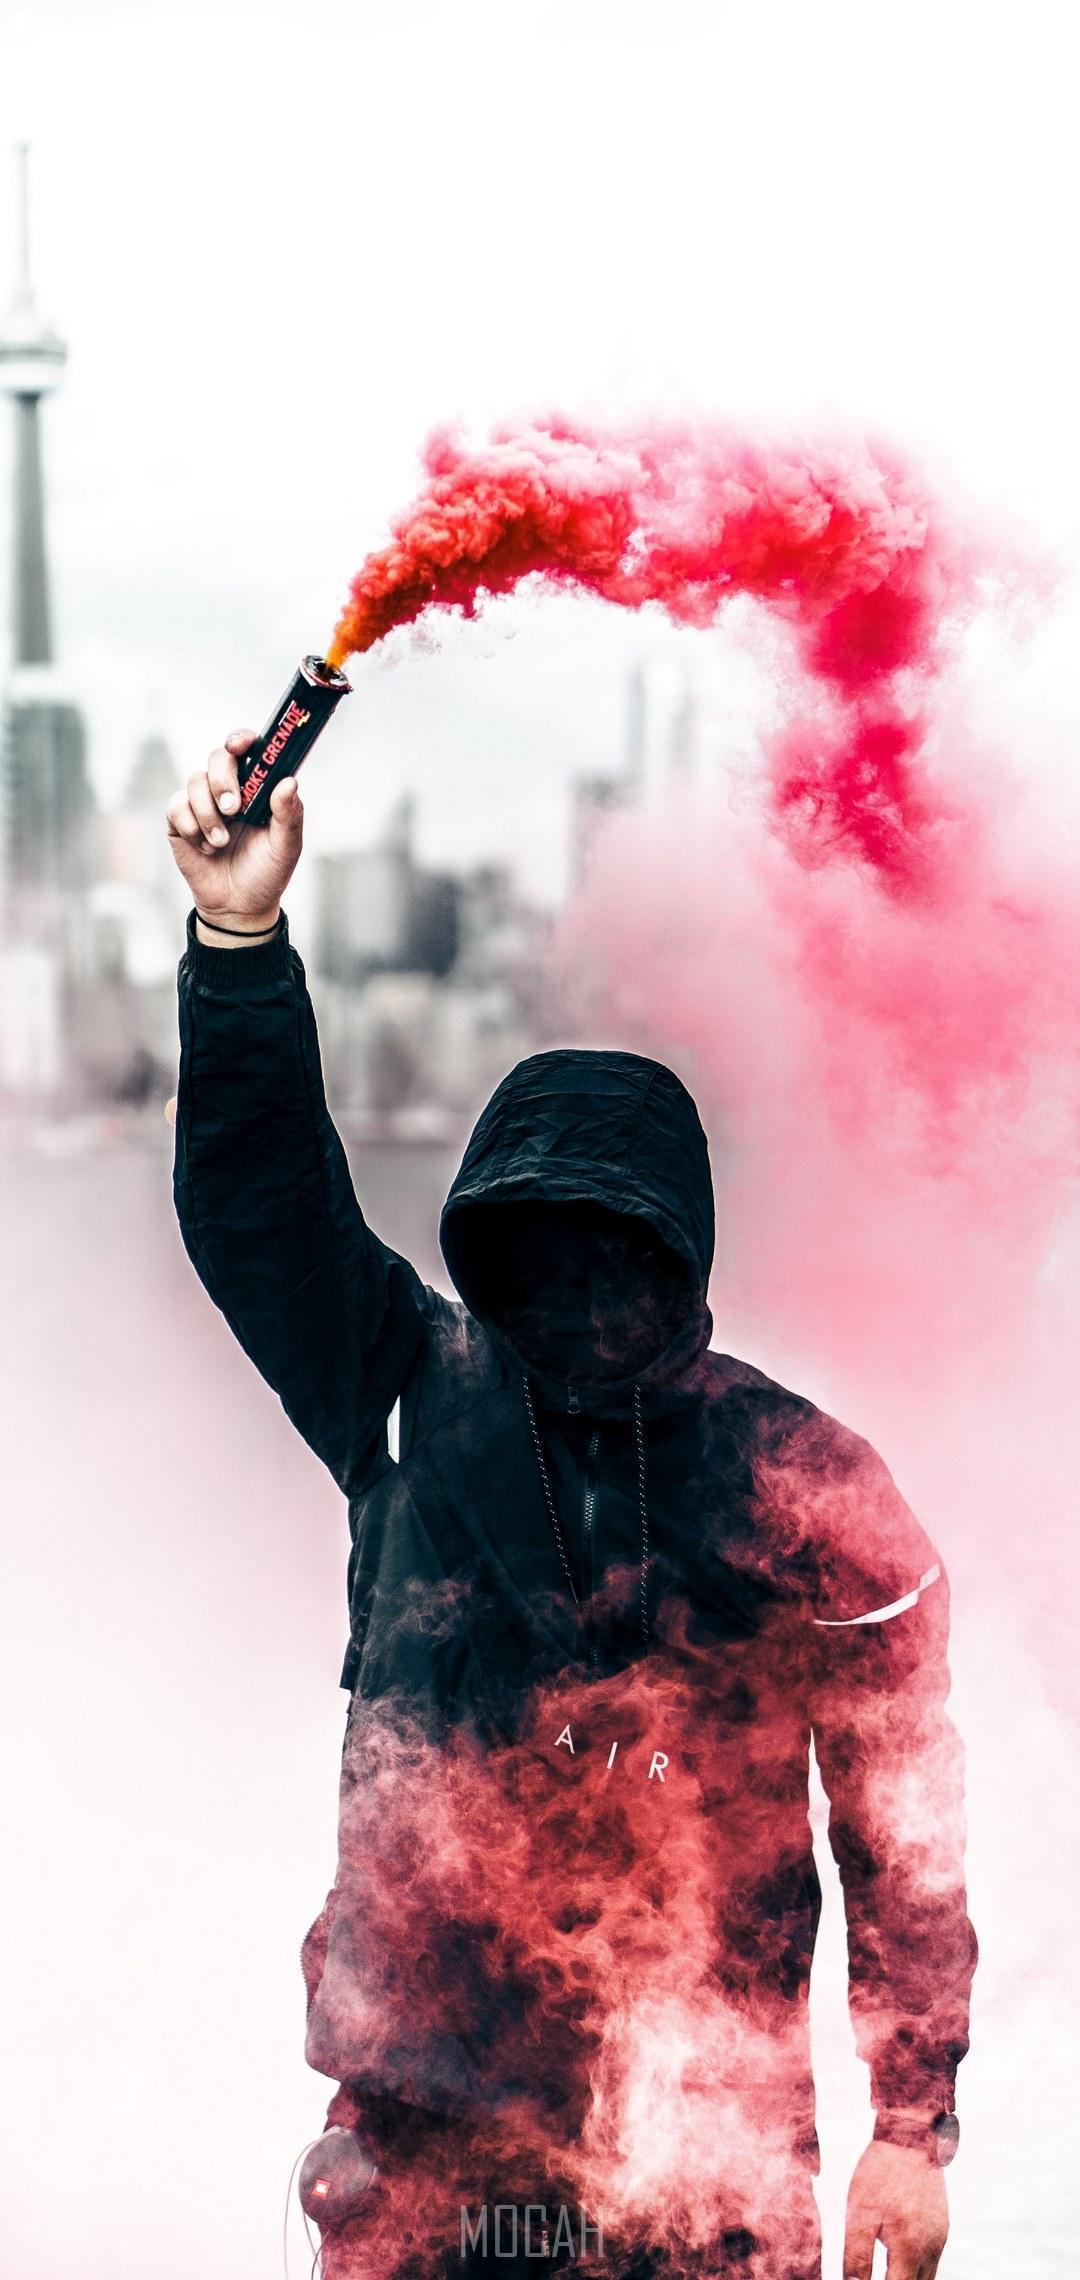 HD wallpaper, Person With Pink Smoke Grenade, 1080X2280, A Person In A Black Hoodie With Obscured Face Holds Up A Pink Smoke Grenade, Huawei Honor 9N Full Hd Wallpaper